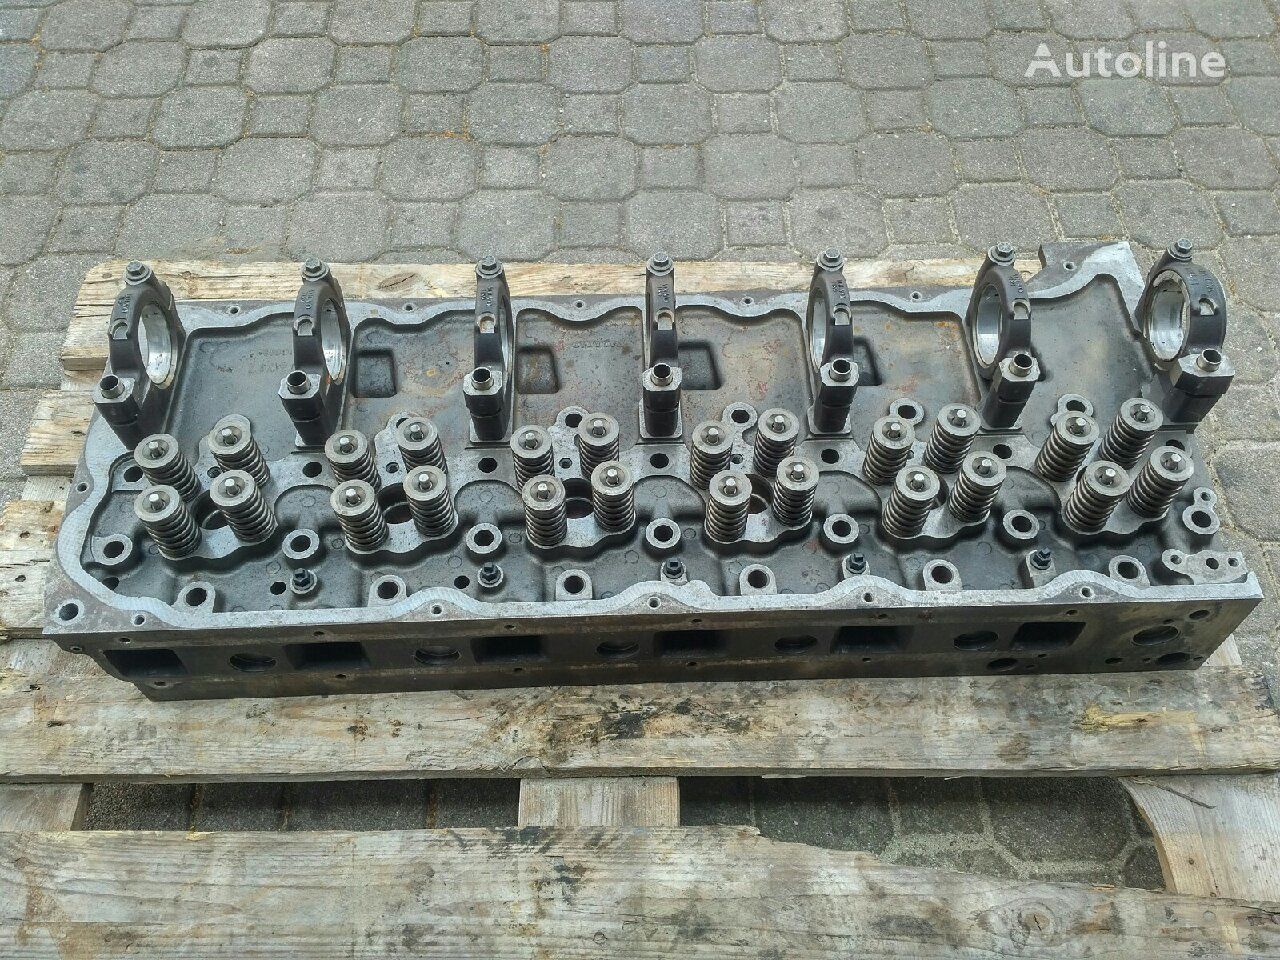 Volvo FM 260 300 340 380 - D9A cylinder head for Volvo E3 - Euro 3 truck